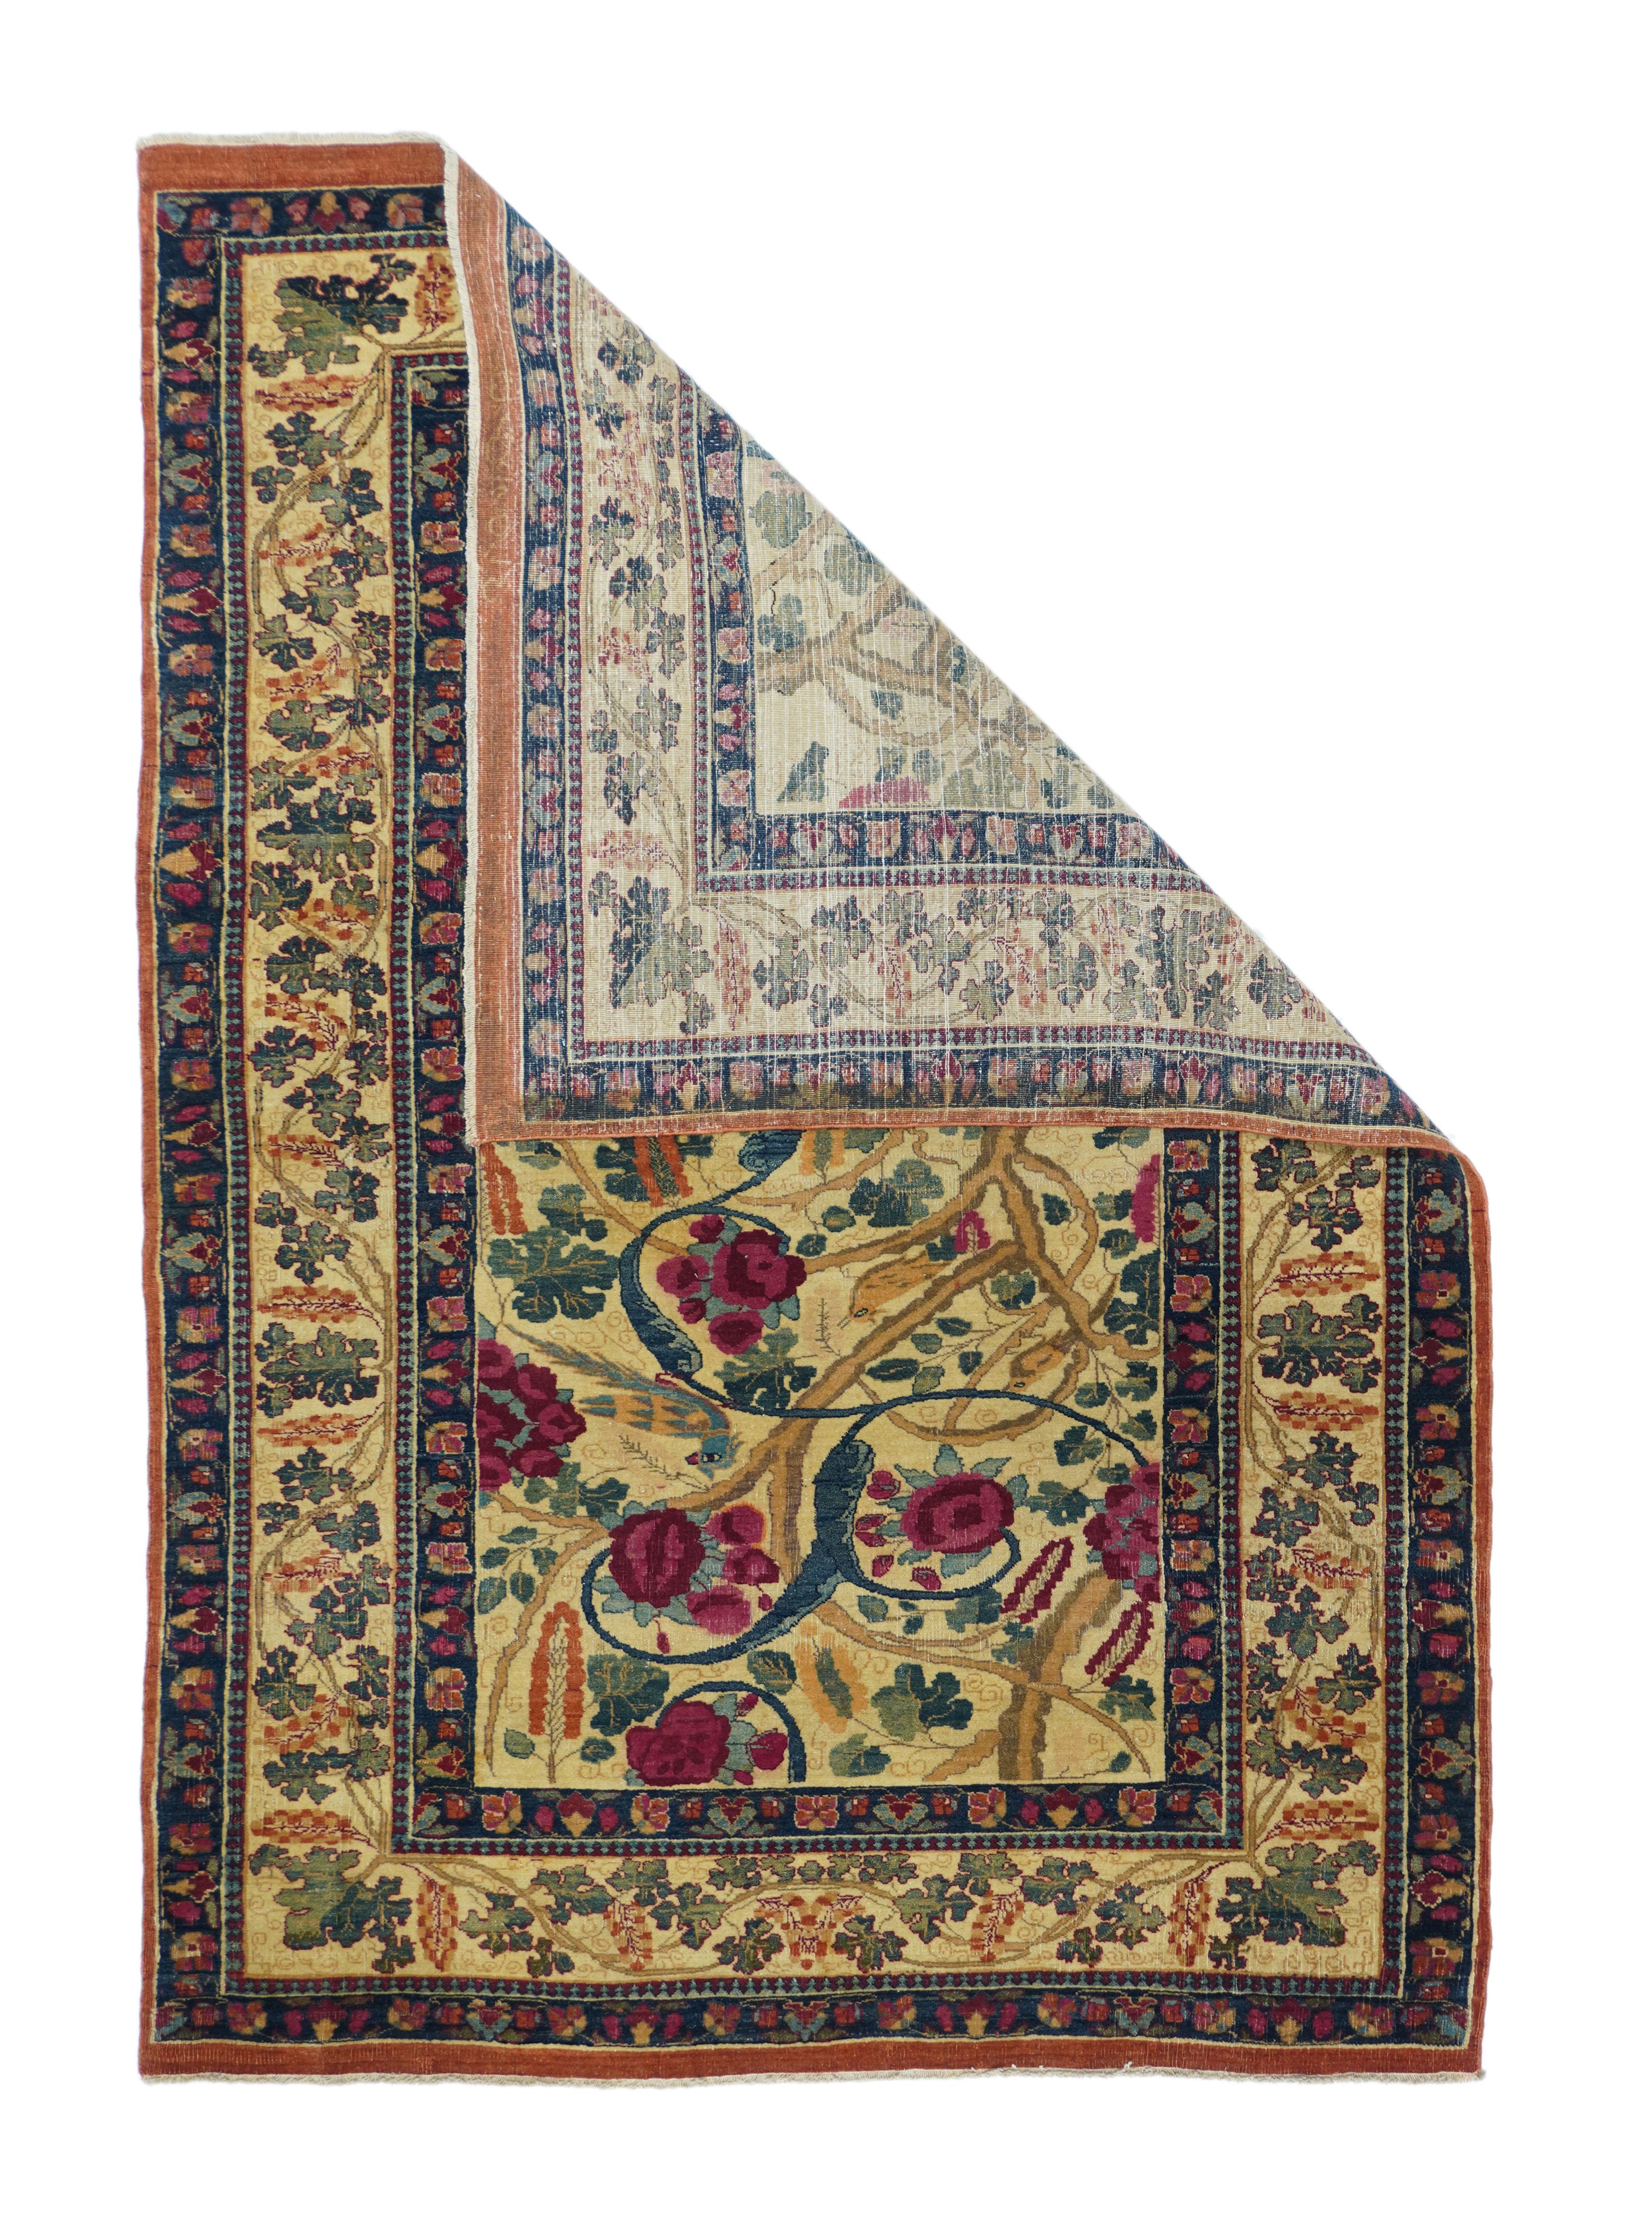 Antique Kerman rug 4' x 5'9''. This very unusual, boldly drawn SE Persian scatter shows a straw ground with a multi-layer arabesque pattern moving diagonally across the field, with a few birds perching bravely amongst the forked arabesques,